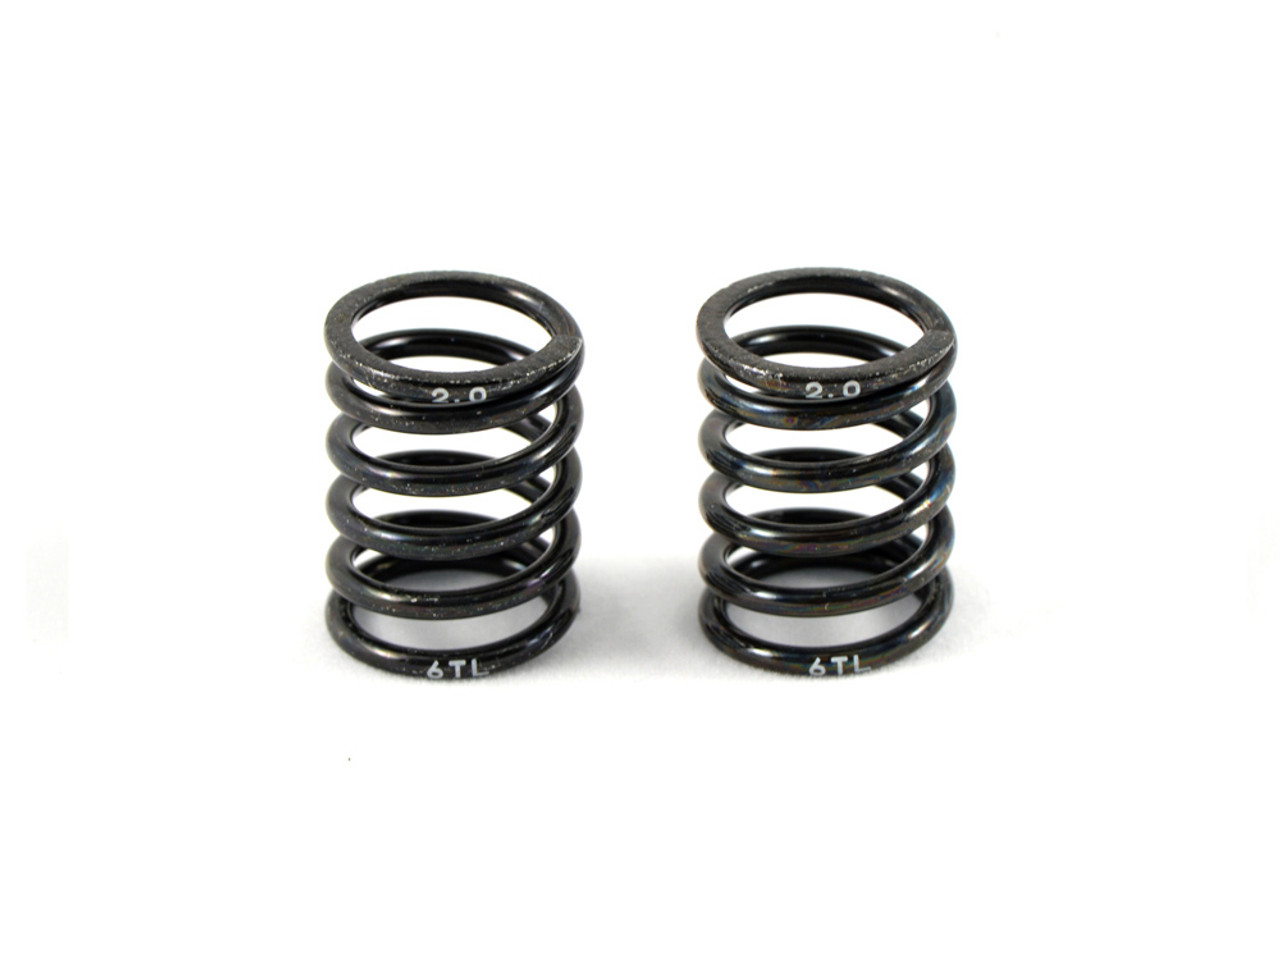 FRONT SPRING 2.0-6TL